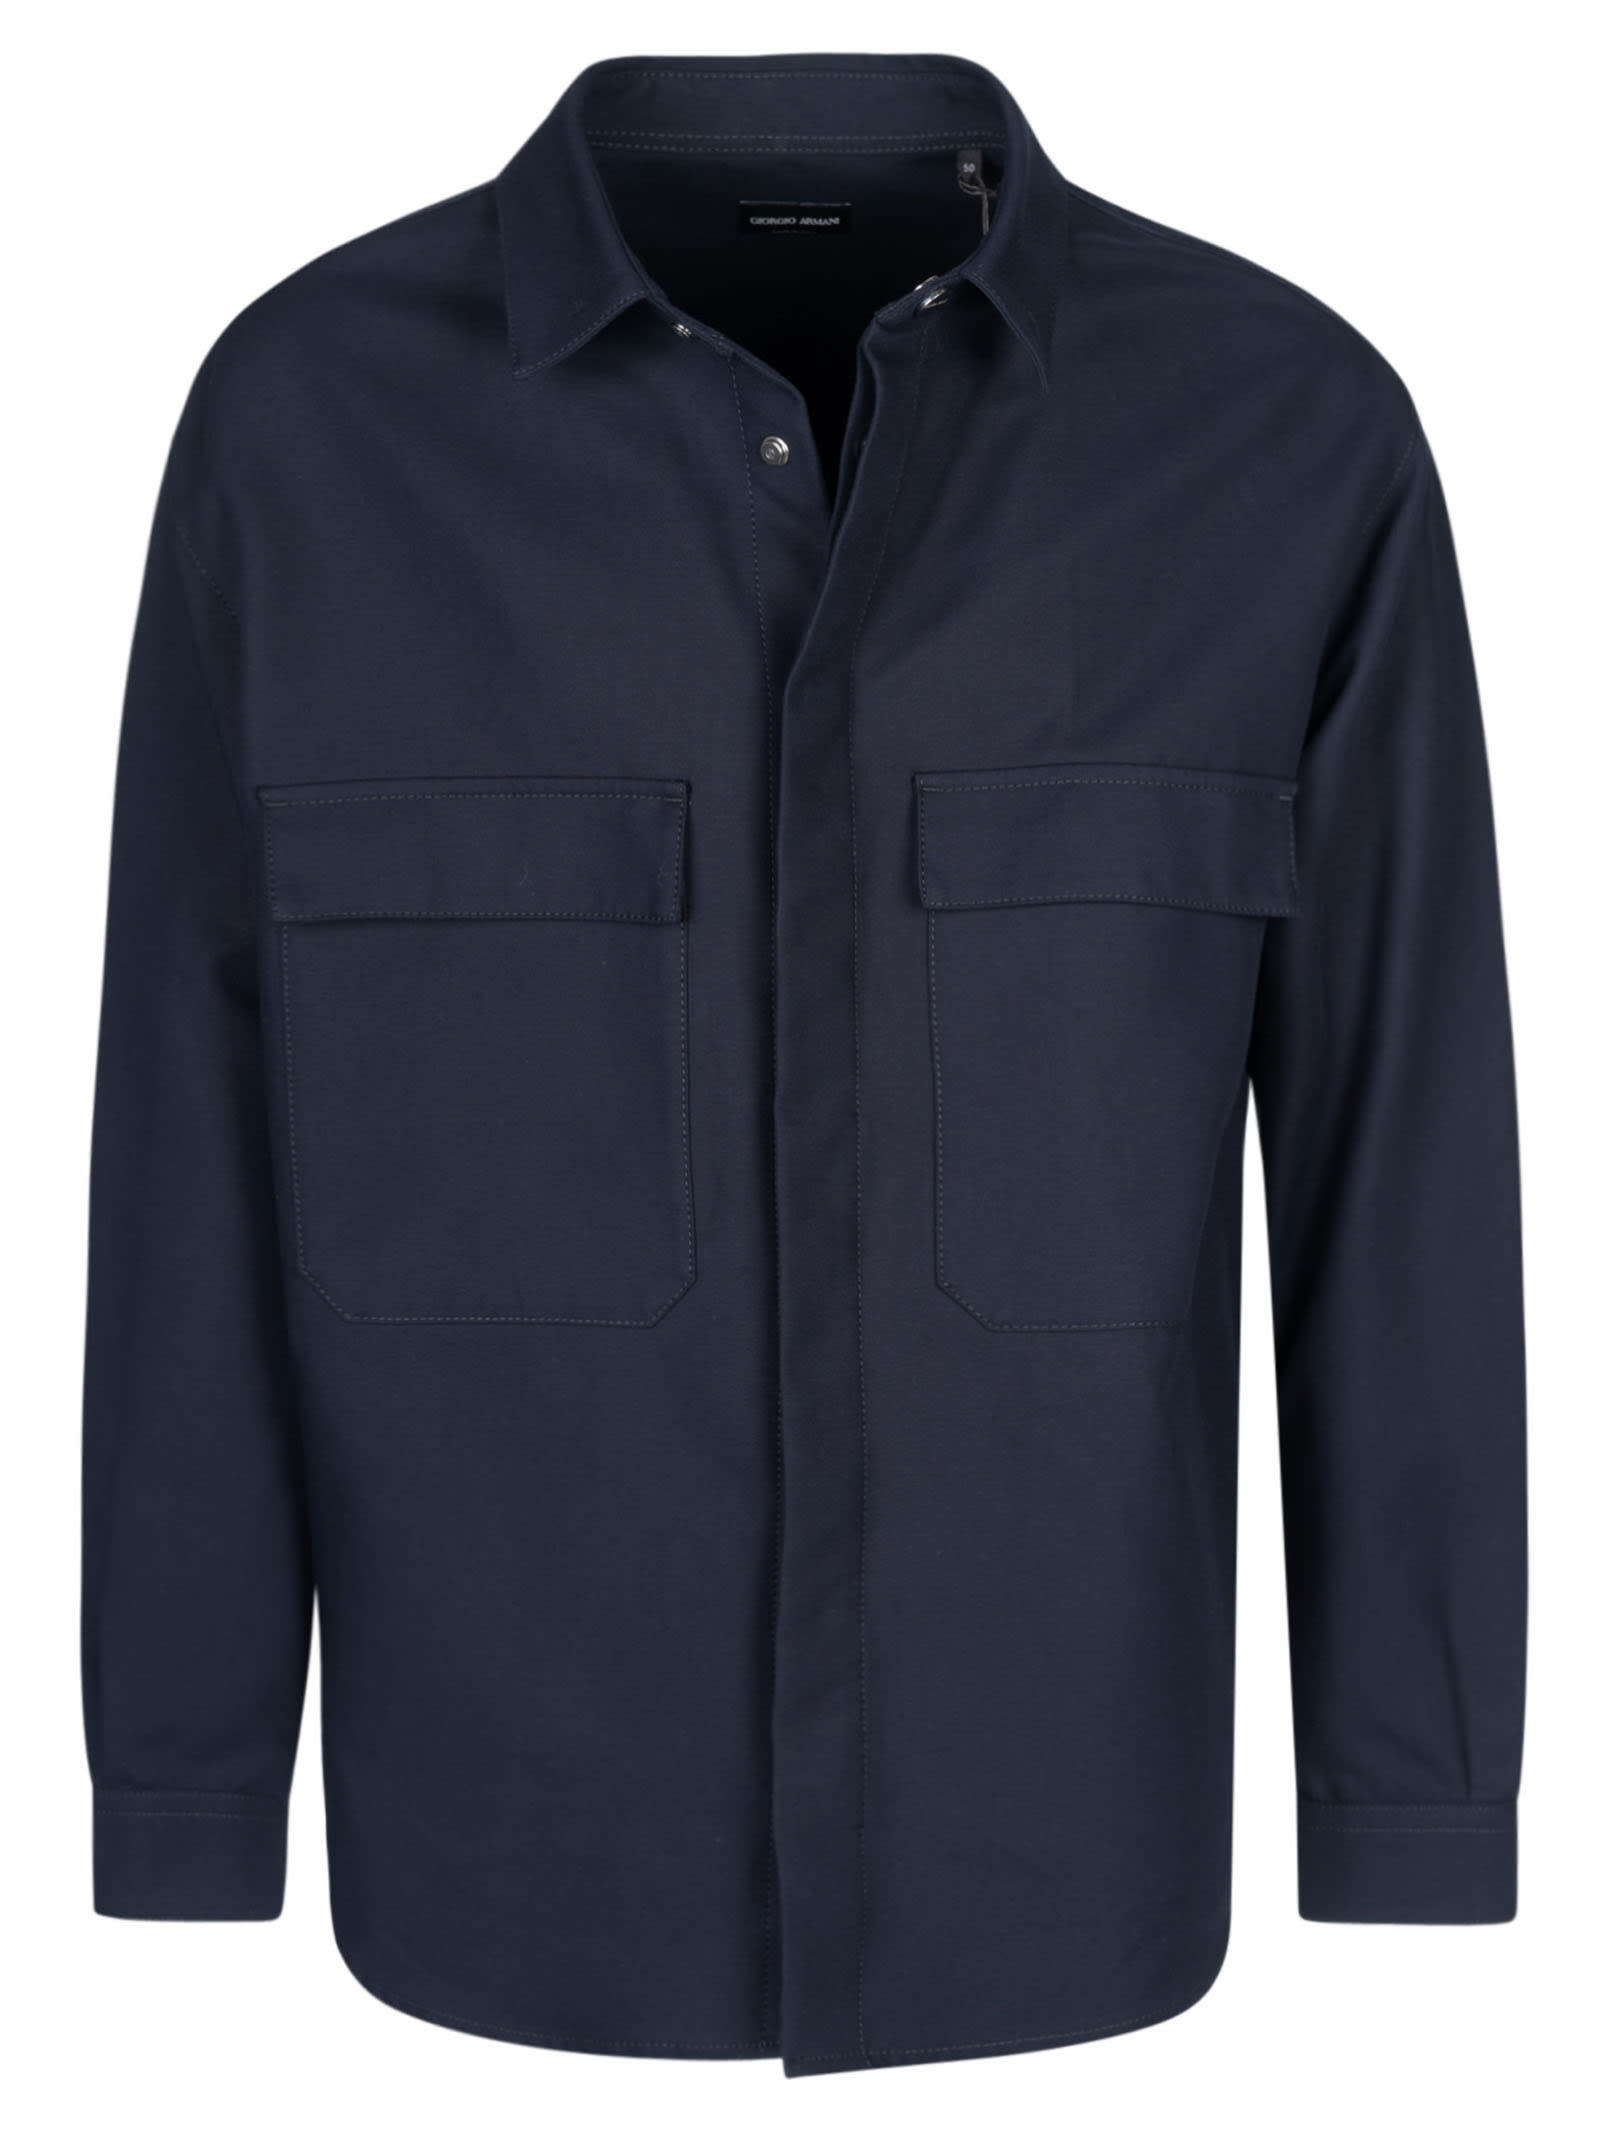 Giorgio Armani Concealed Button Jacket In Night Blue